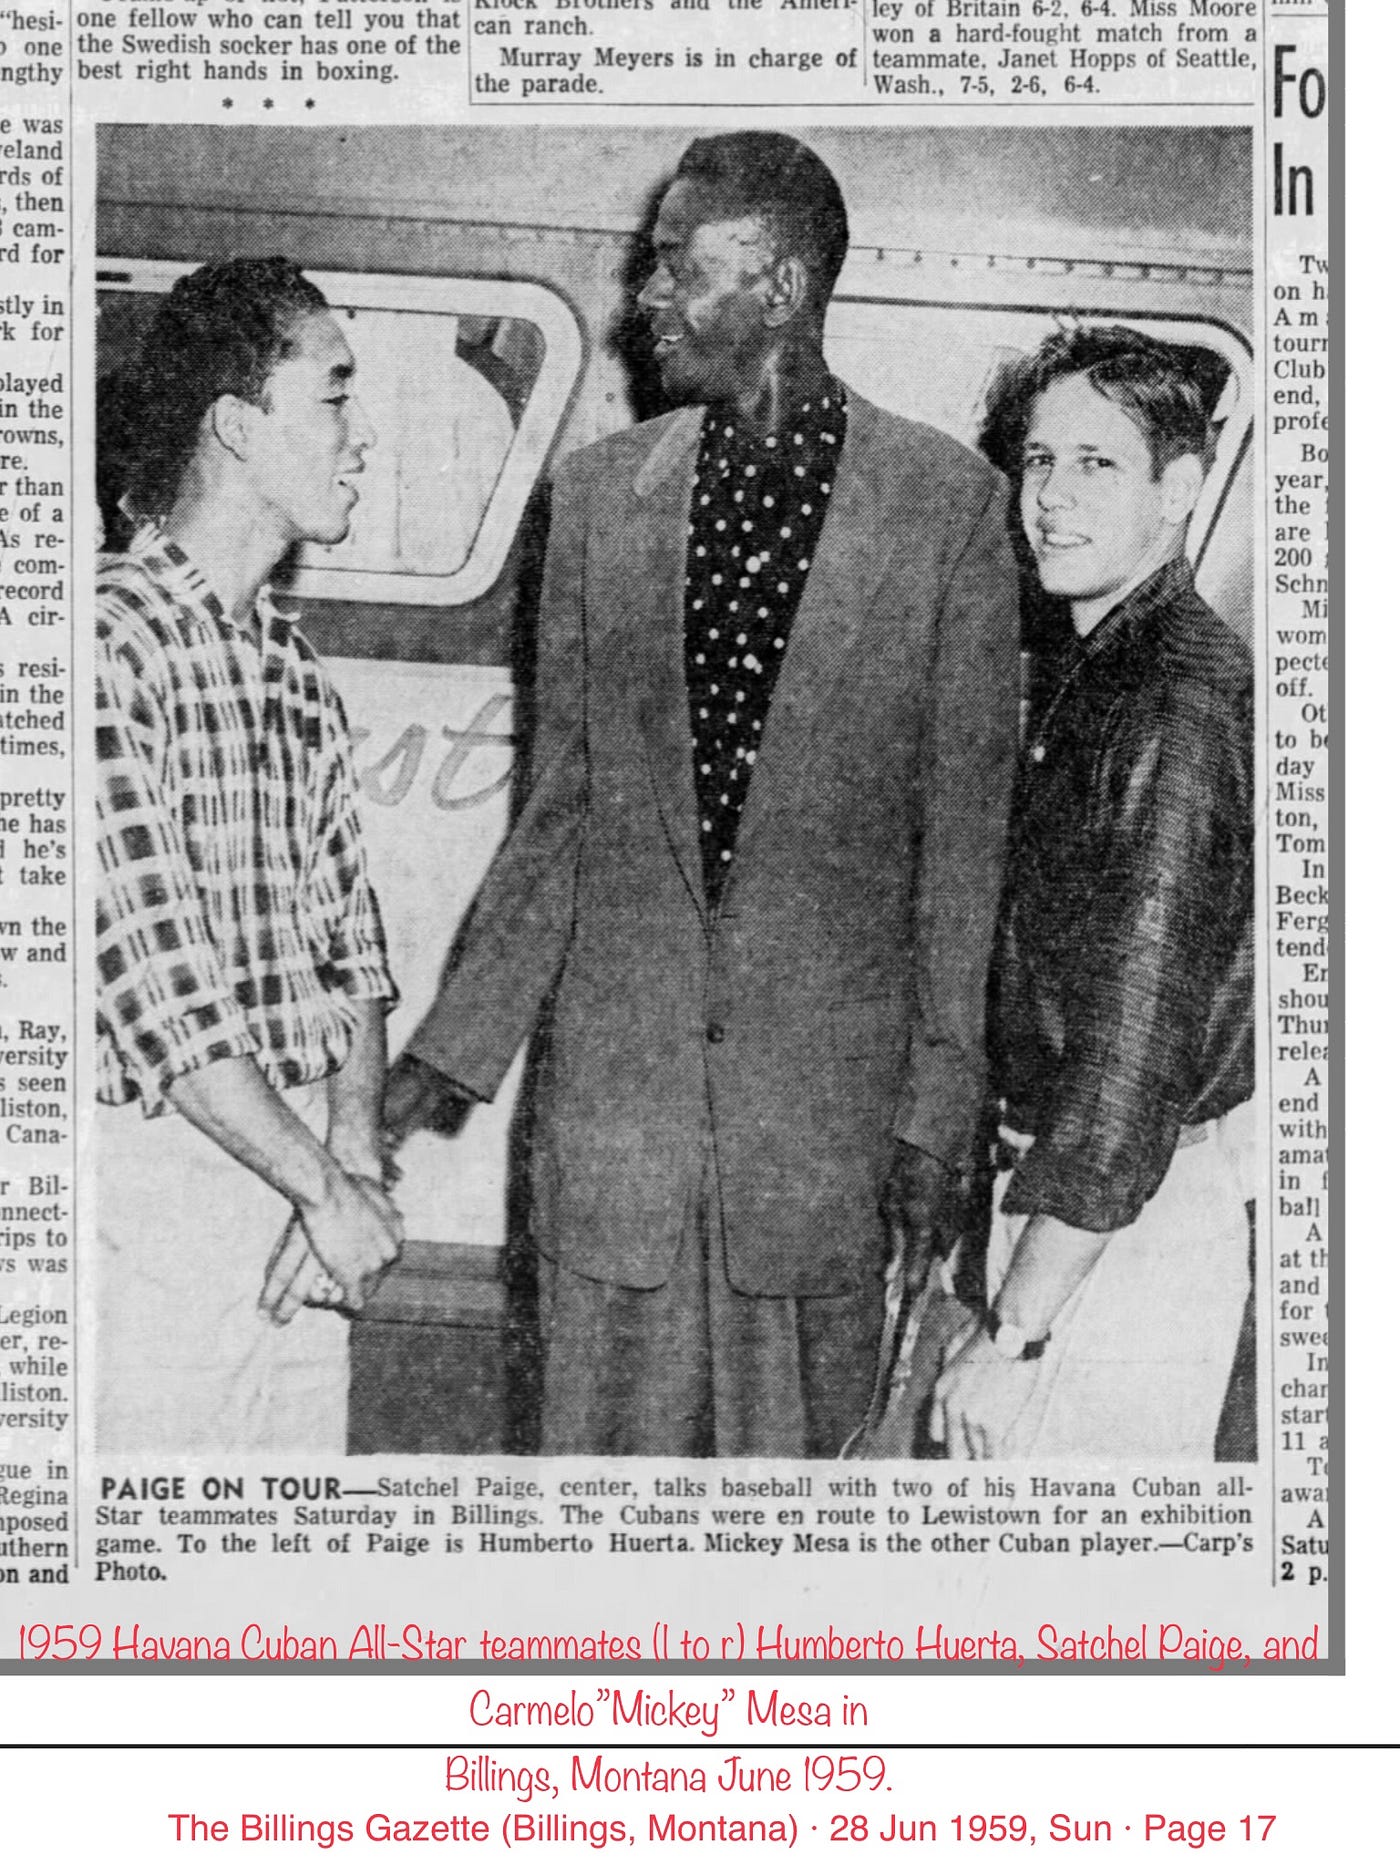 I've been doing research on Satchel Paige's 1959 barnstorming tour